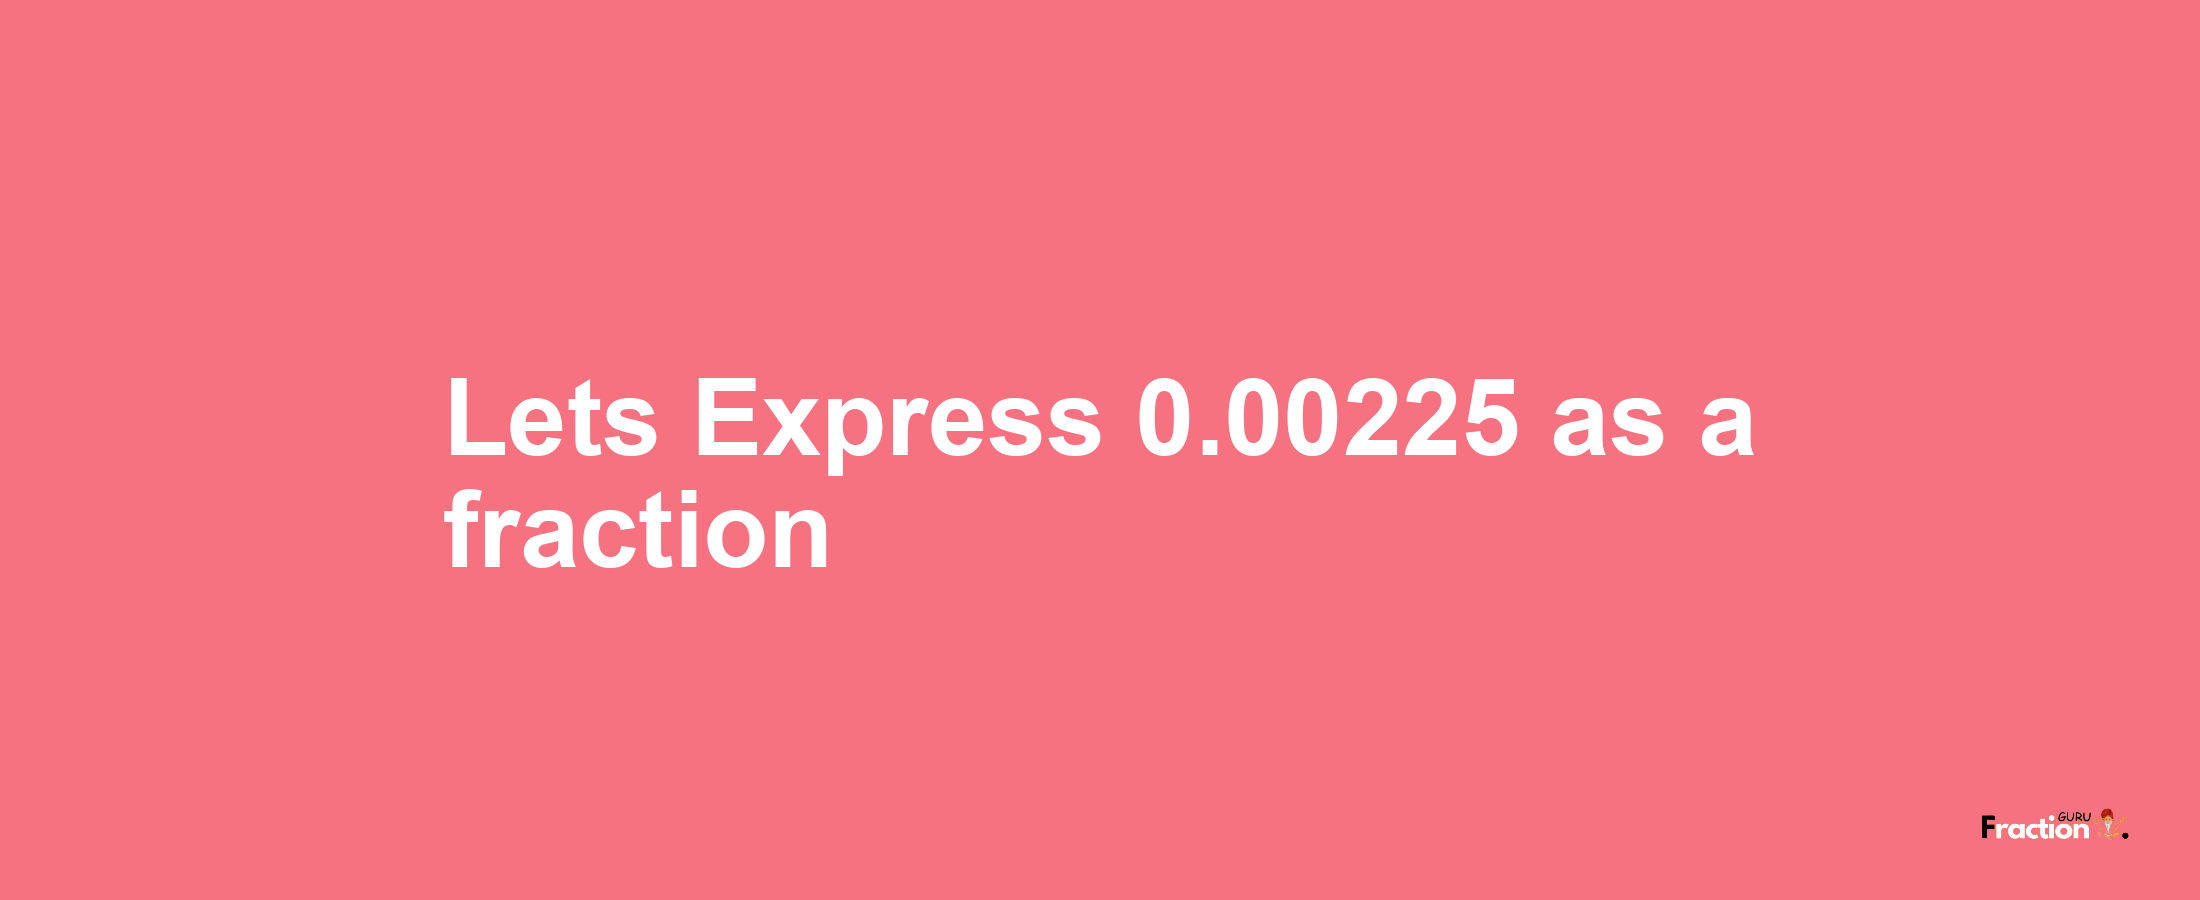 Lets Express 0.00225 as afraction